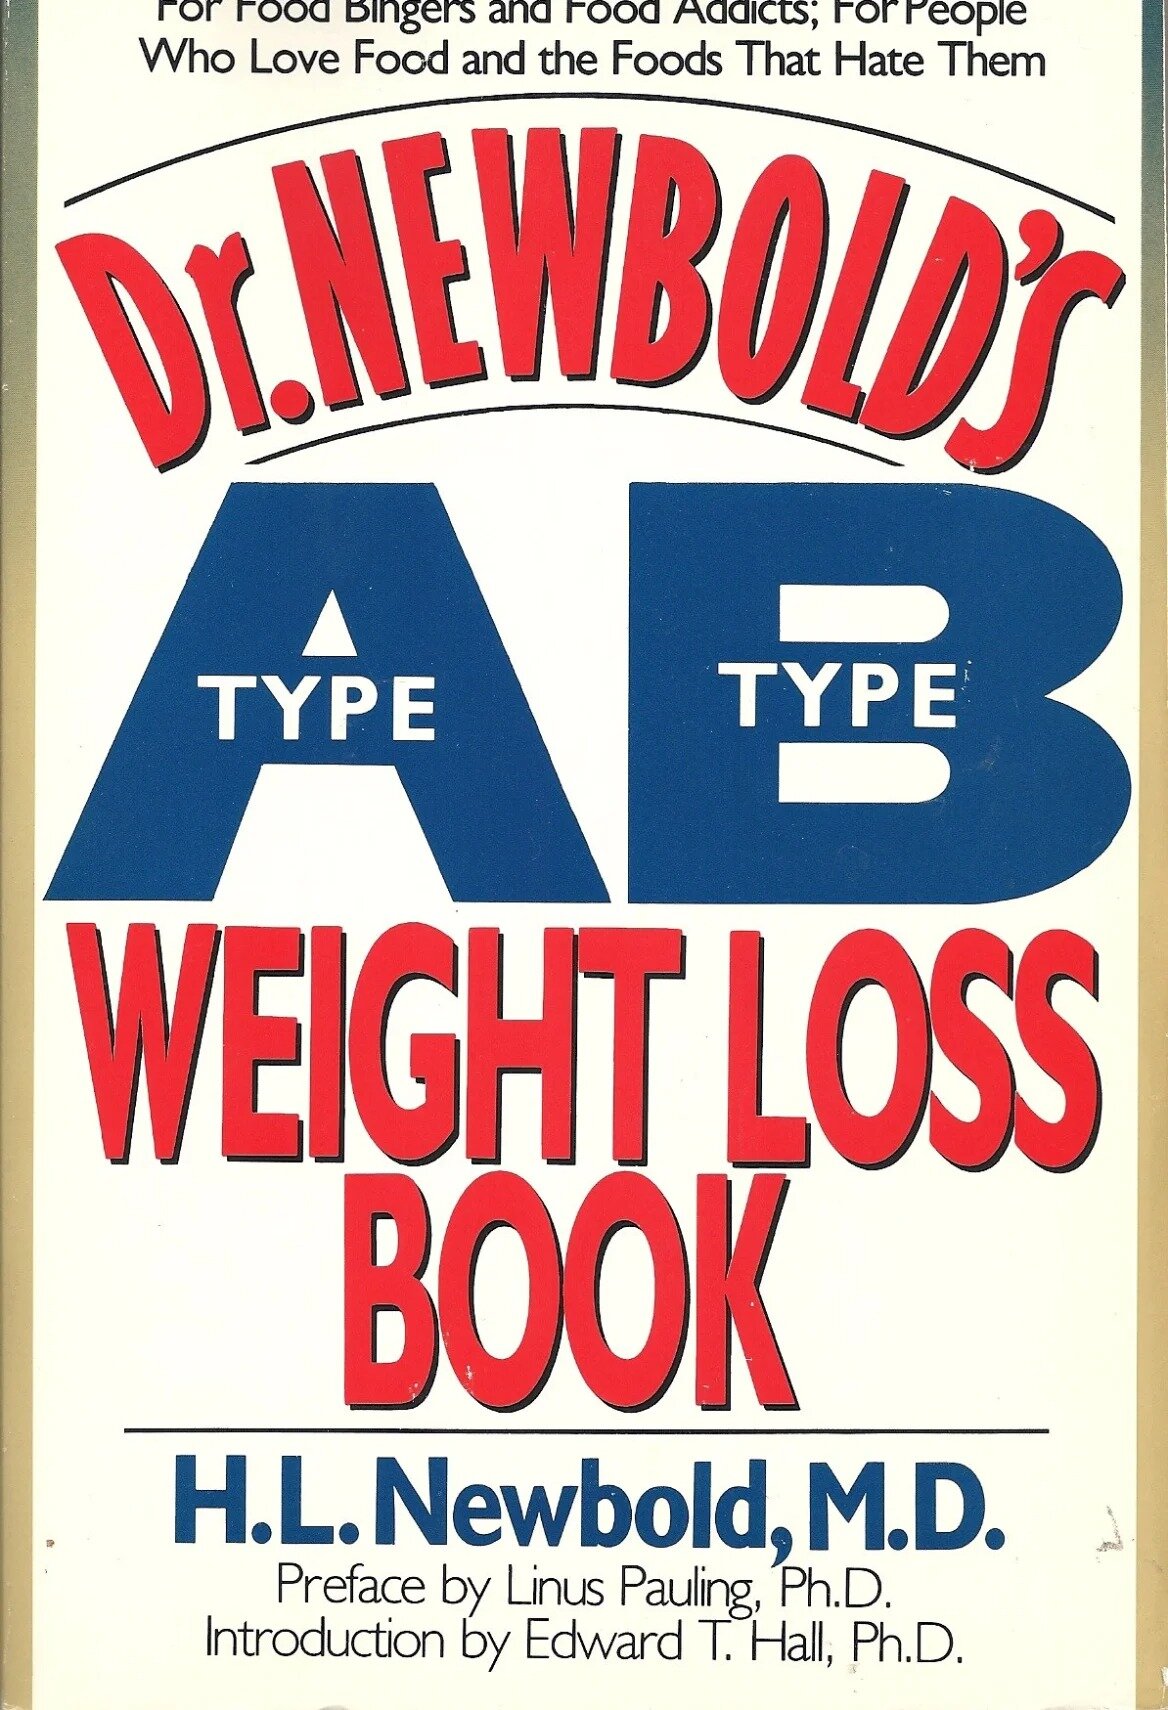 The Type A-Type B Weight Loss Book by H. L. Newbold